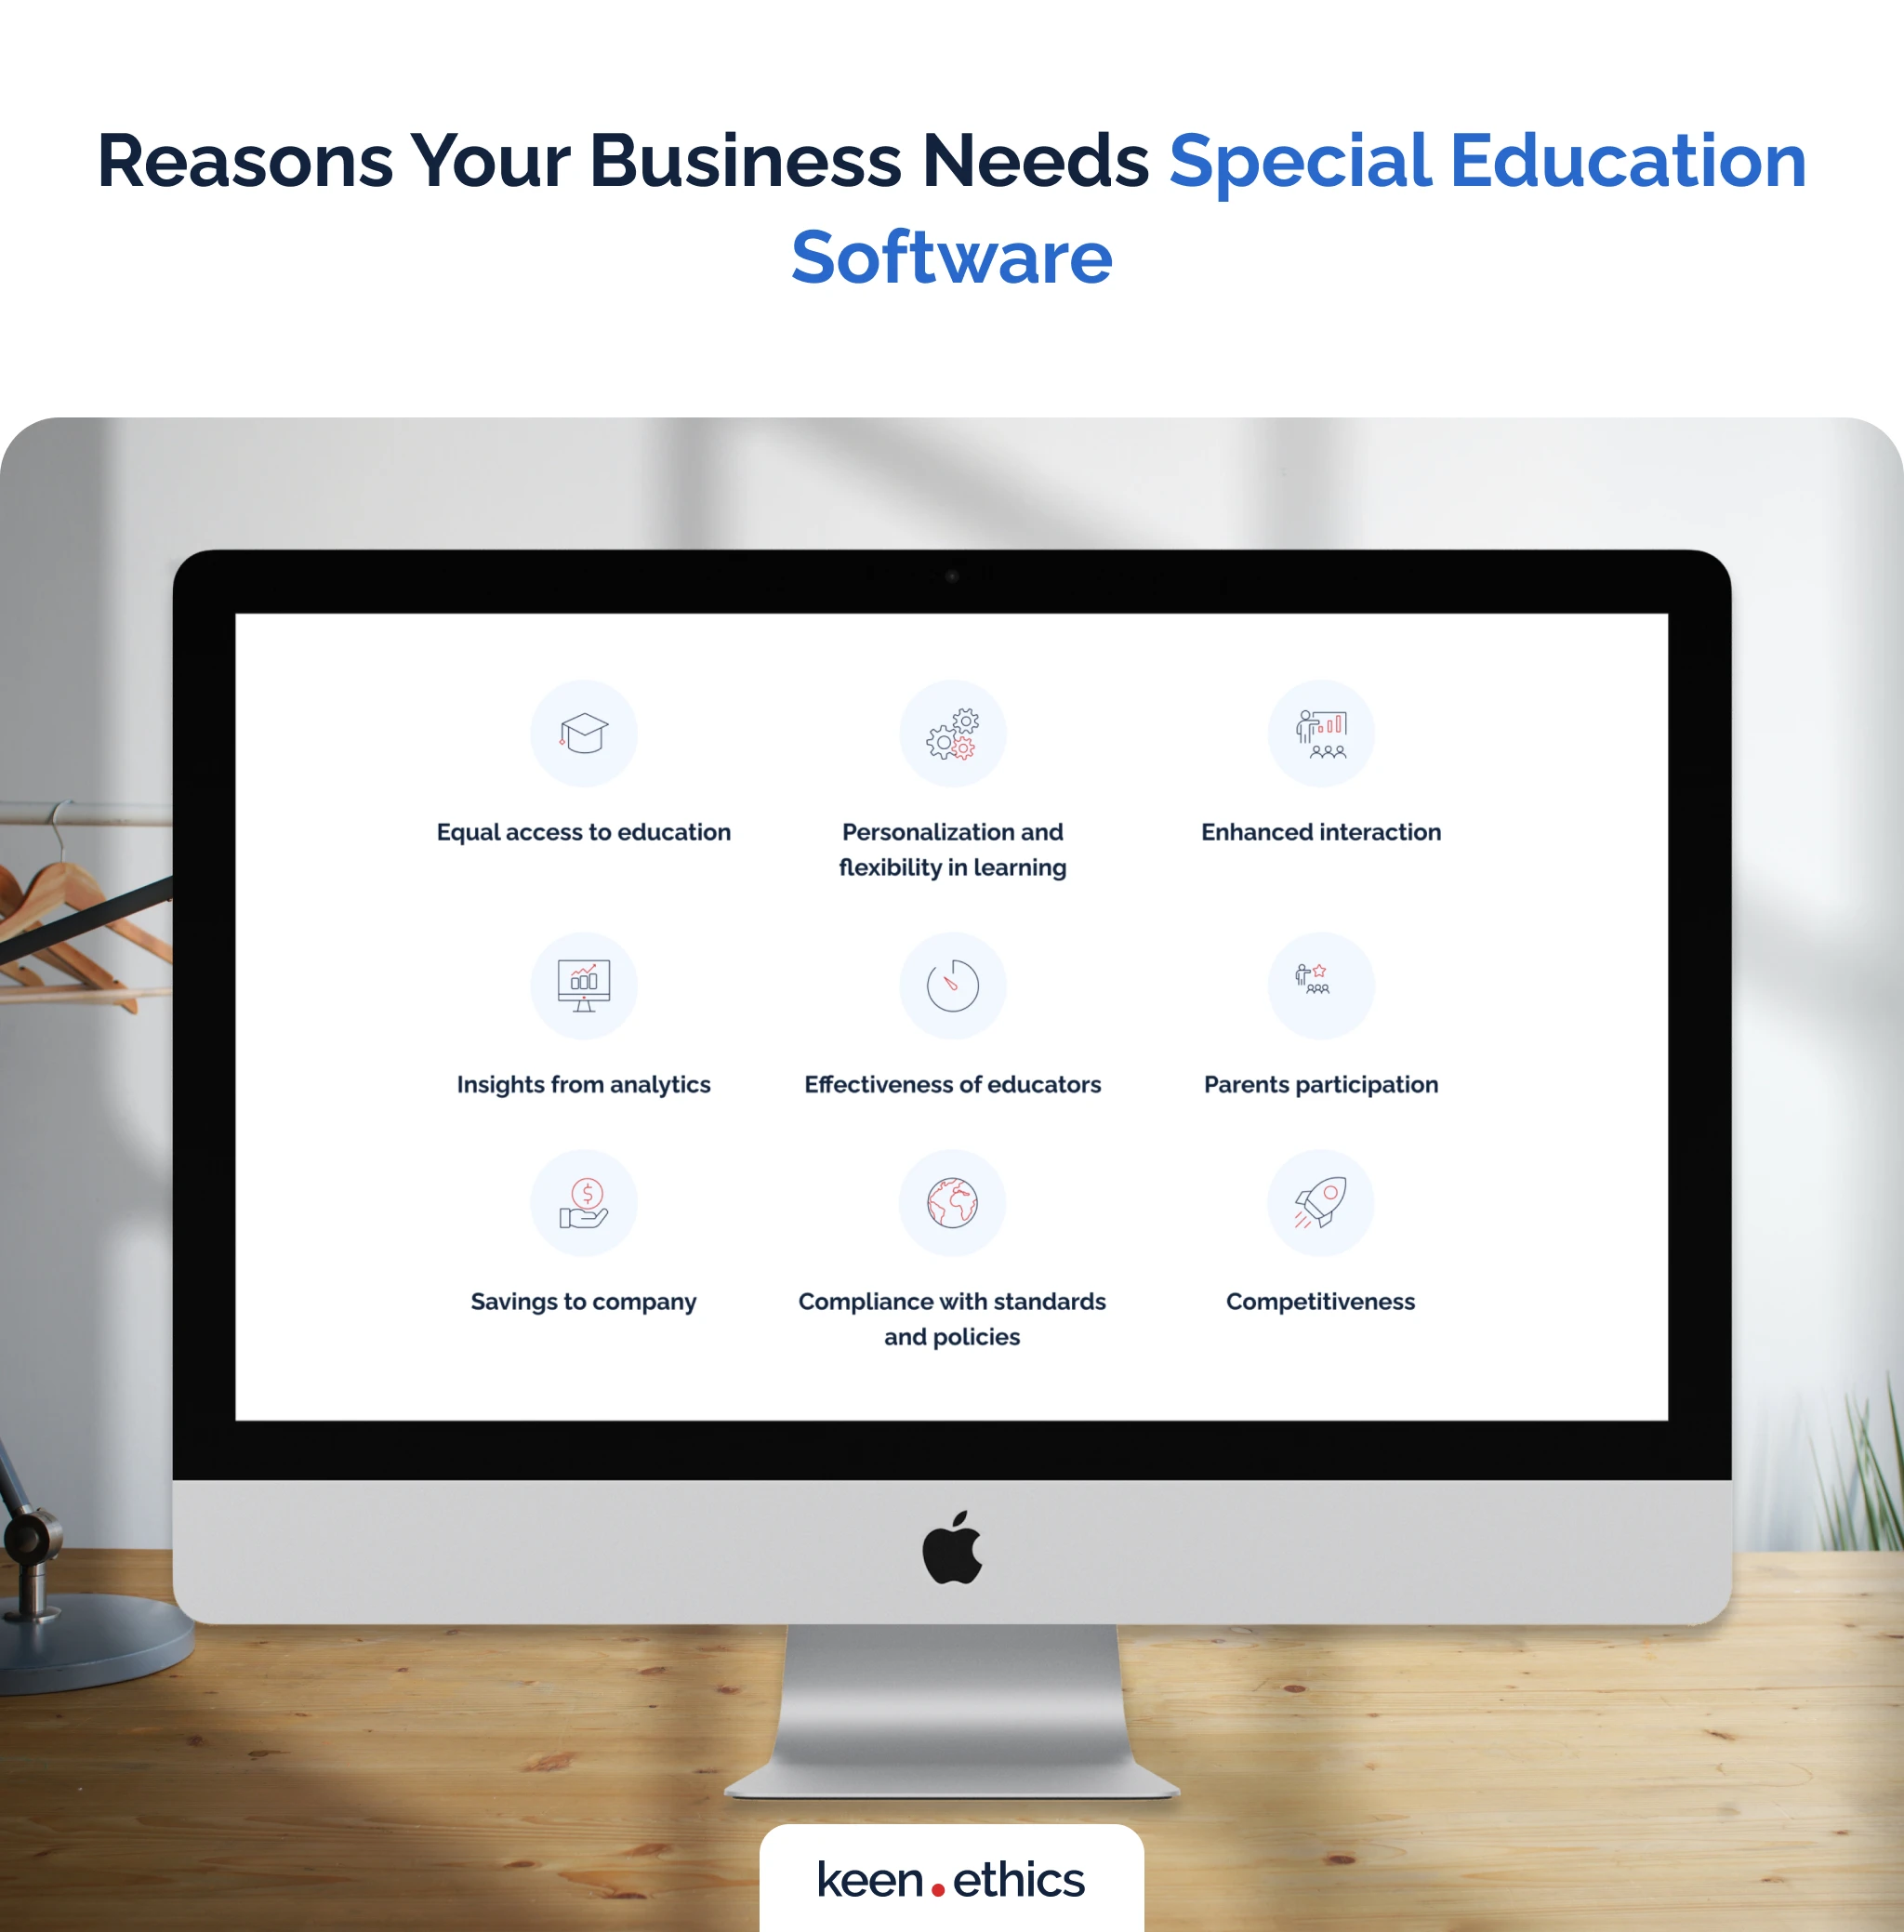 Reasons Your Business Needs Special Education Software